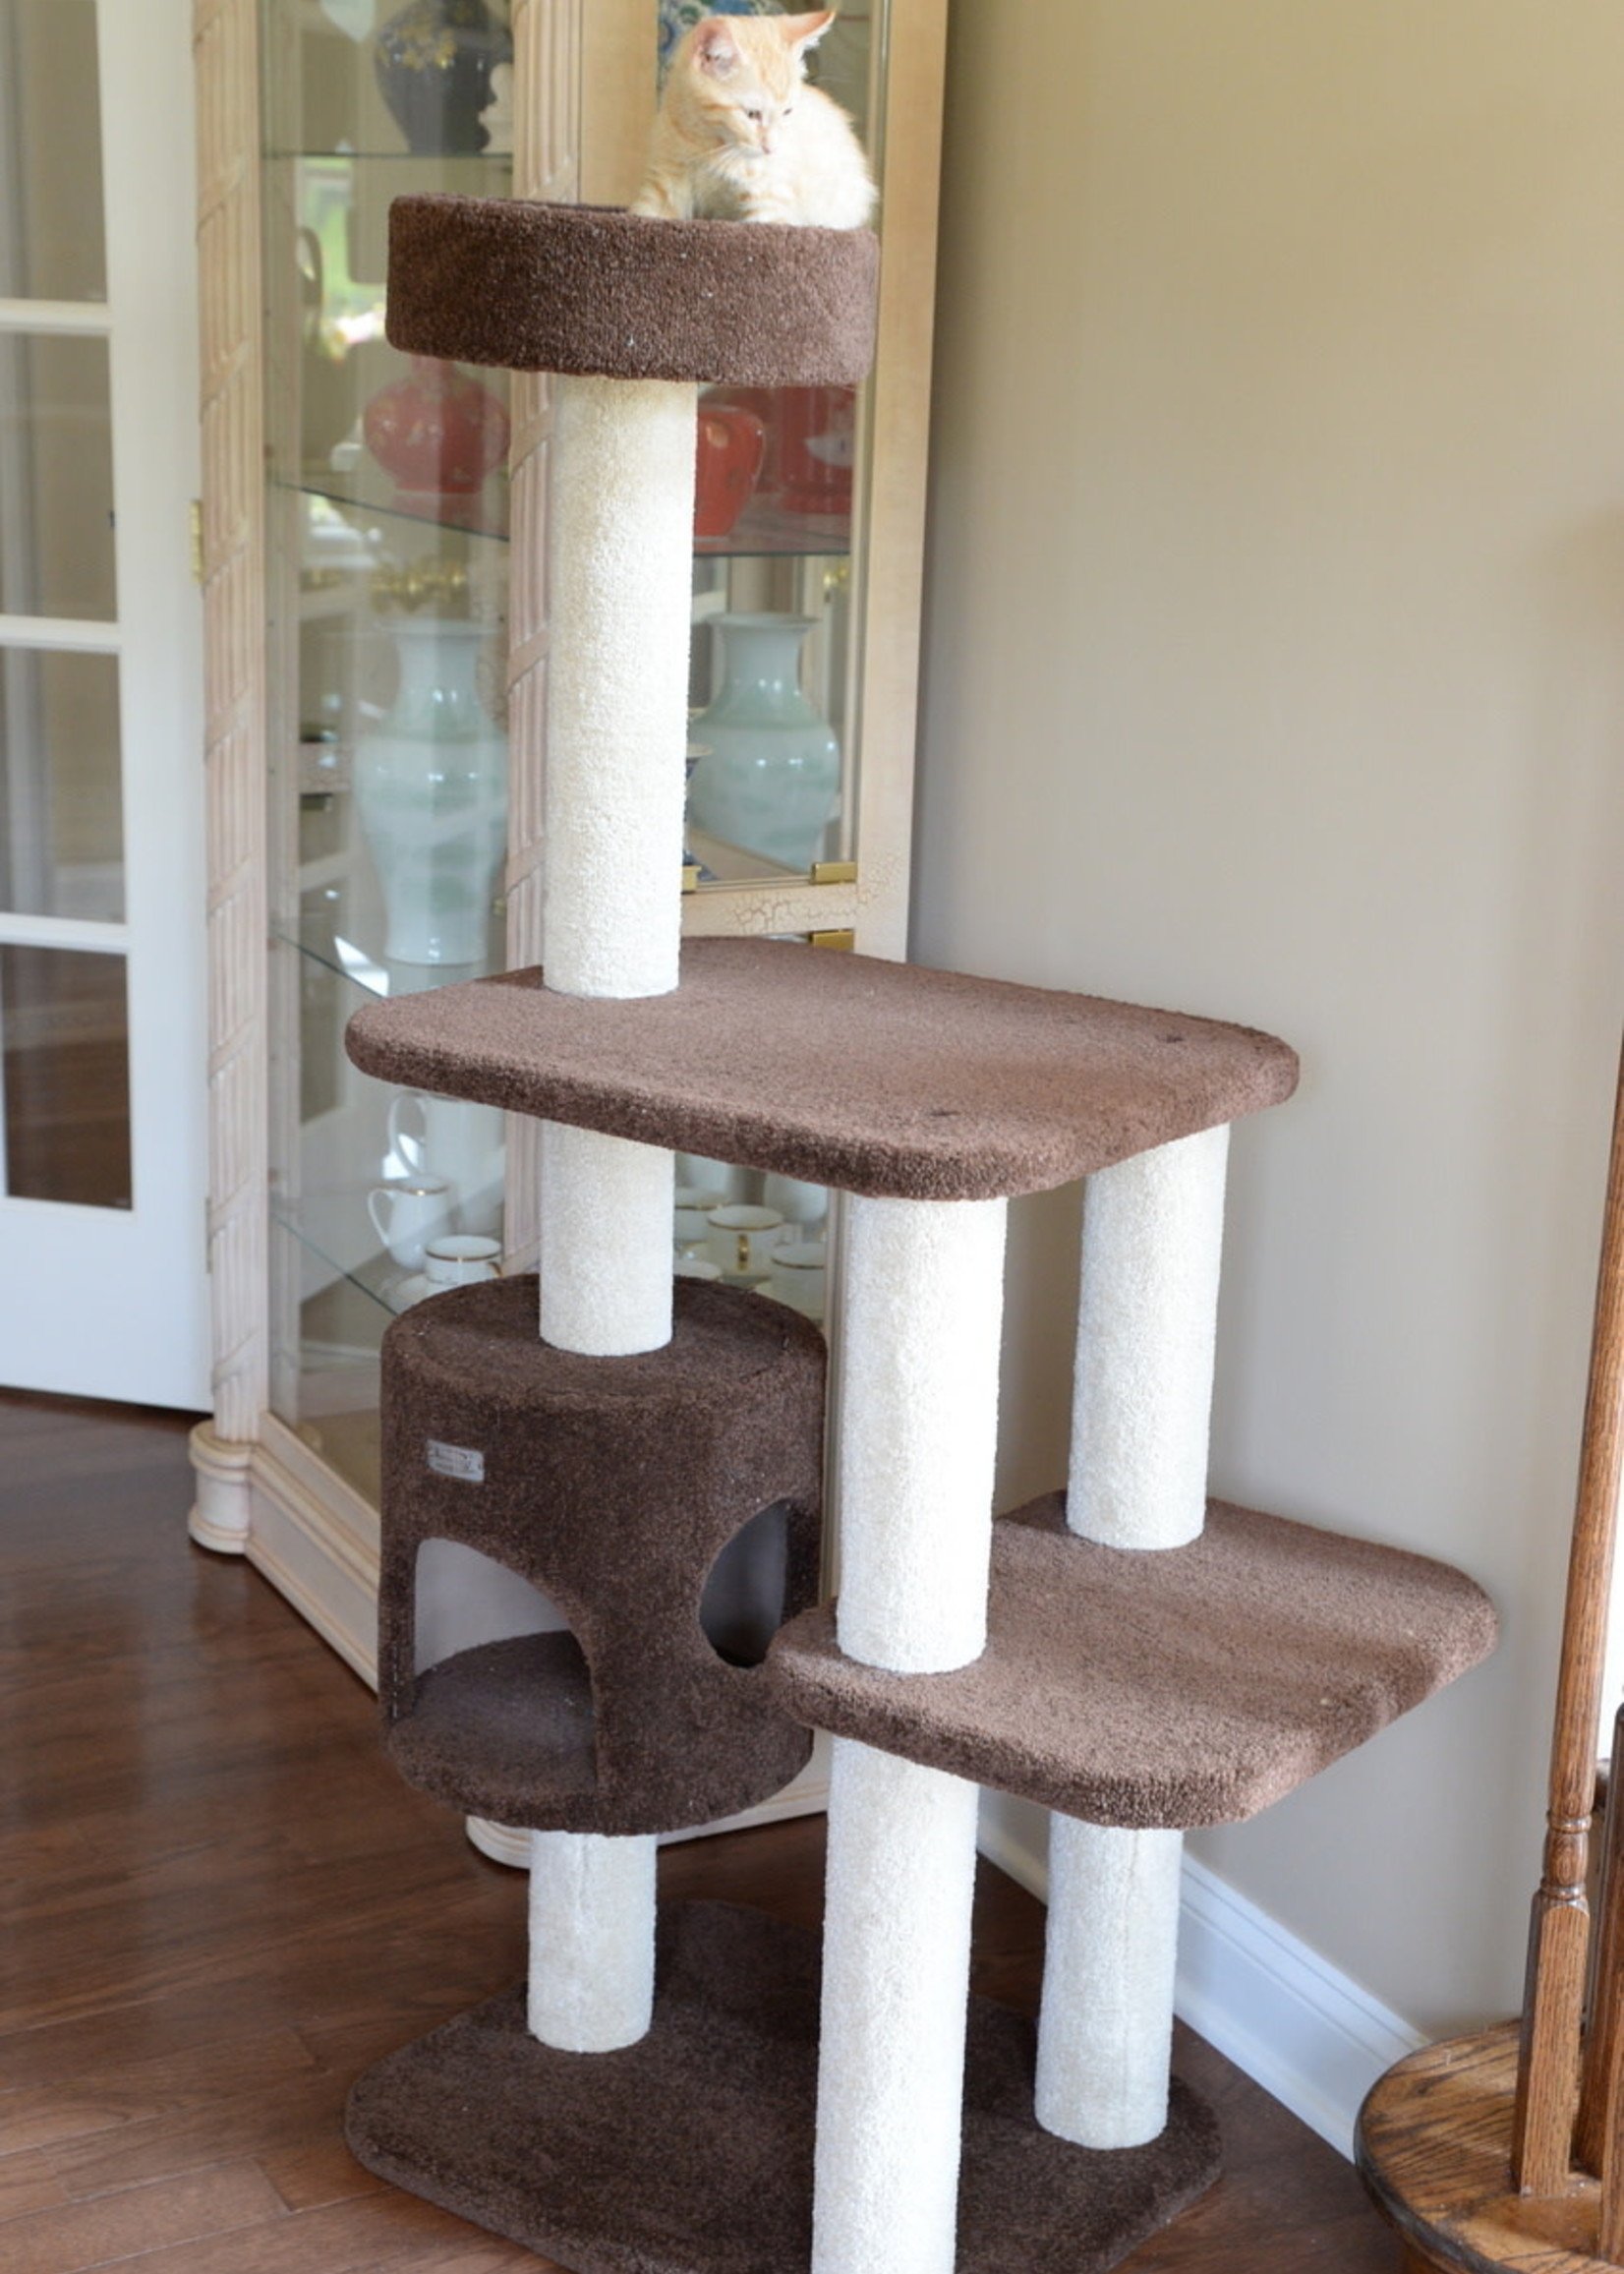 Armarkat Armarkat 3-Level Carpeted Cat Tree Condo Brown